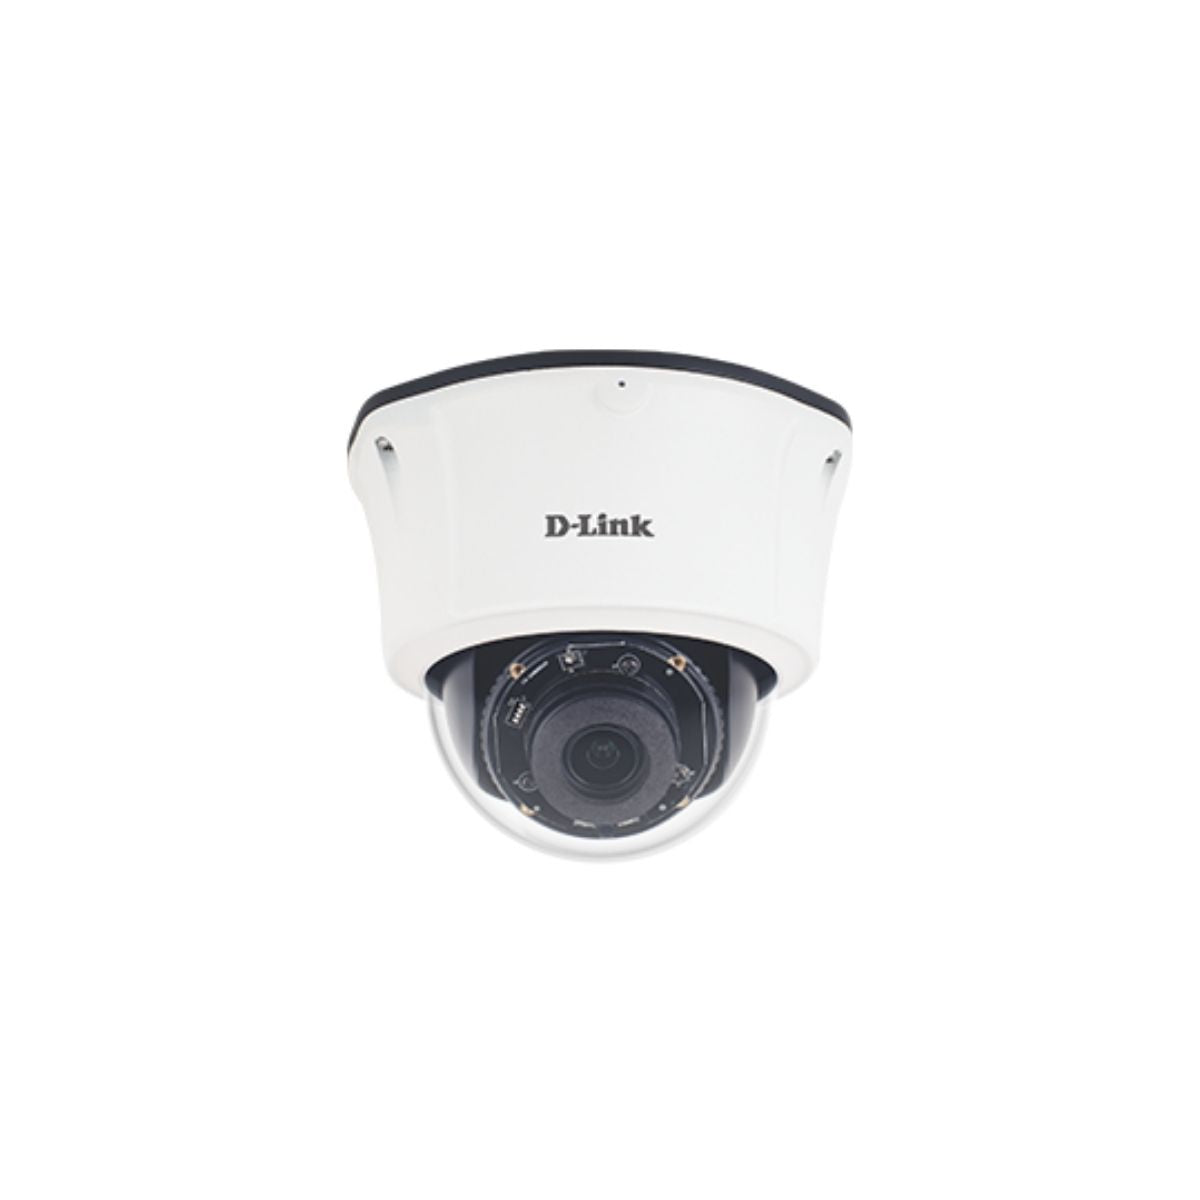 D-Link DCS-F4614 4MP Day & Night Outdoor Fixed Dome Network Camera - Ooberpad